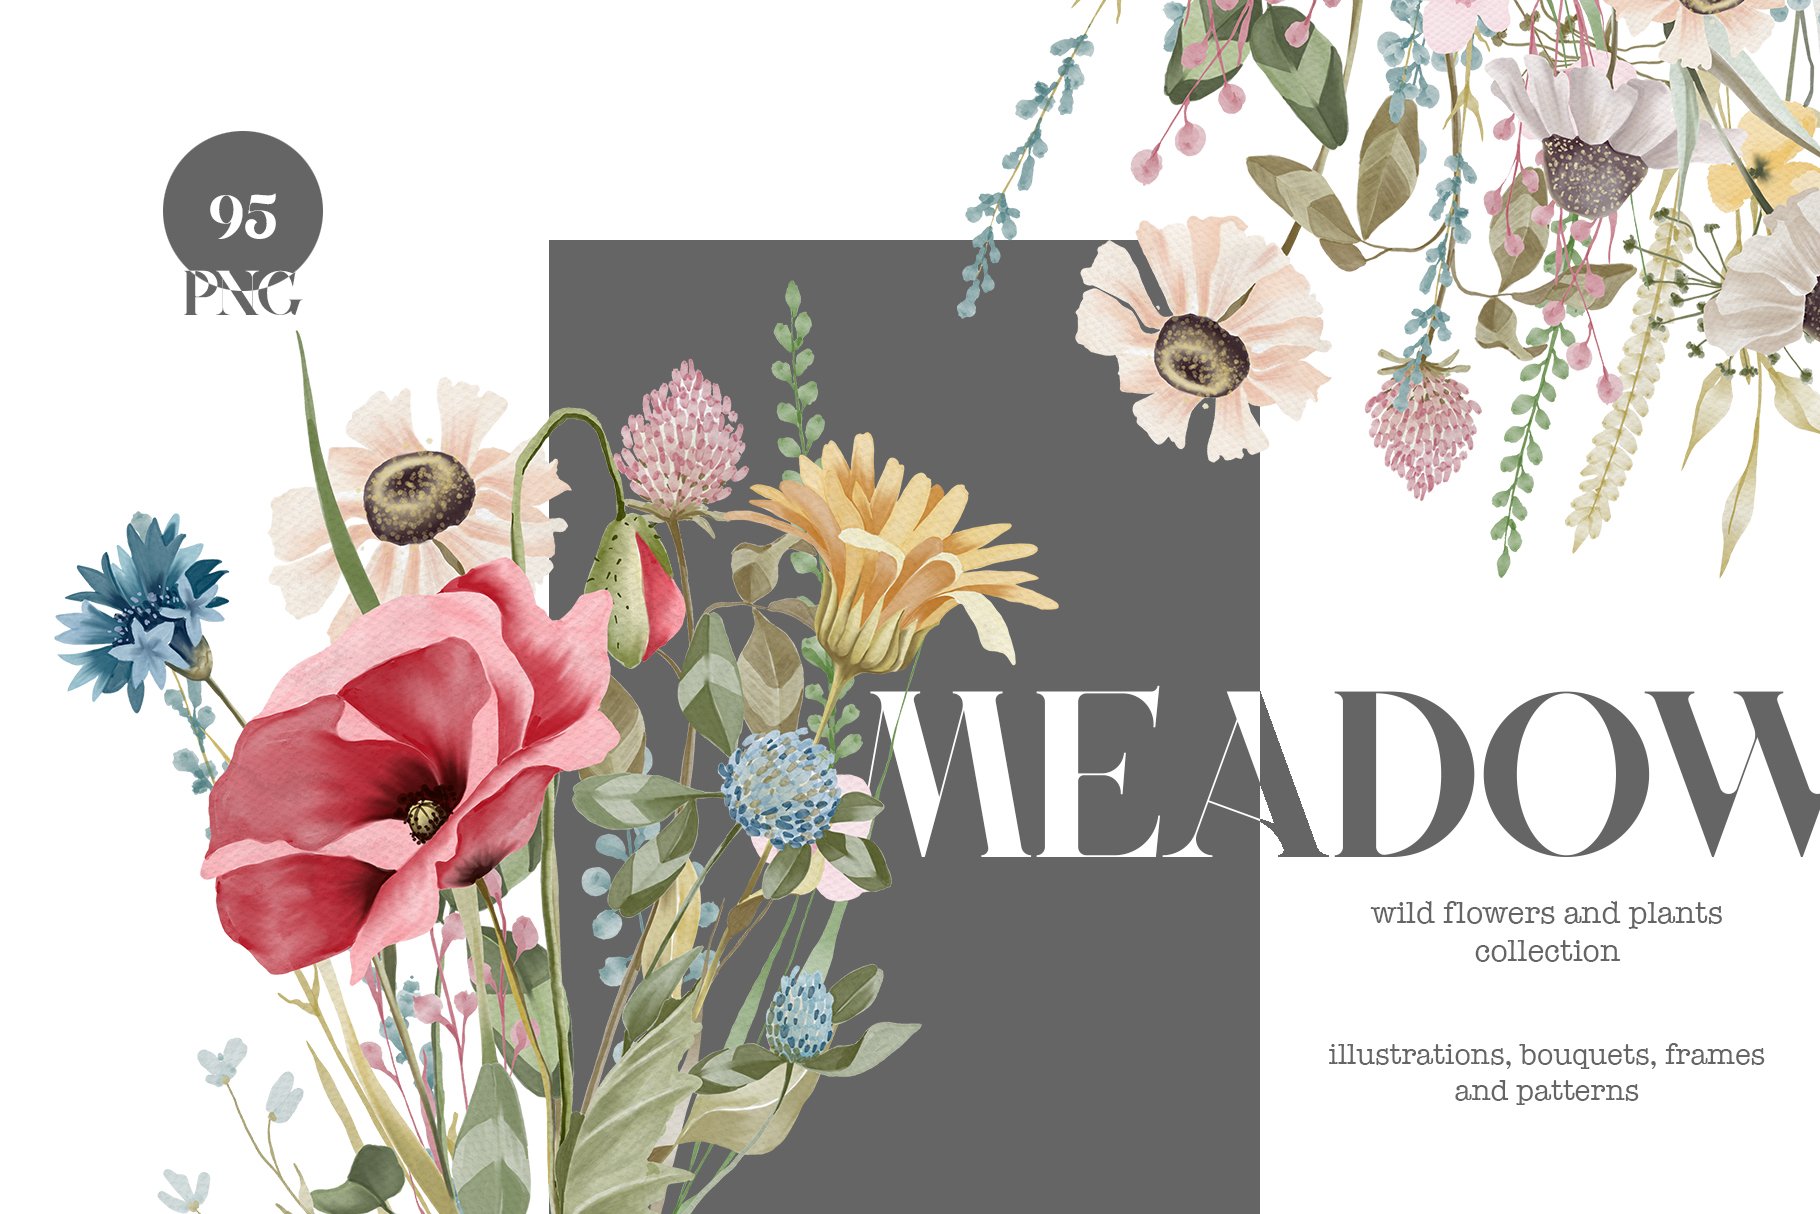 Meadow flowers and plants collection cover image.